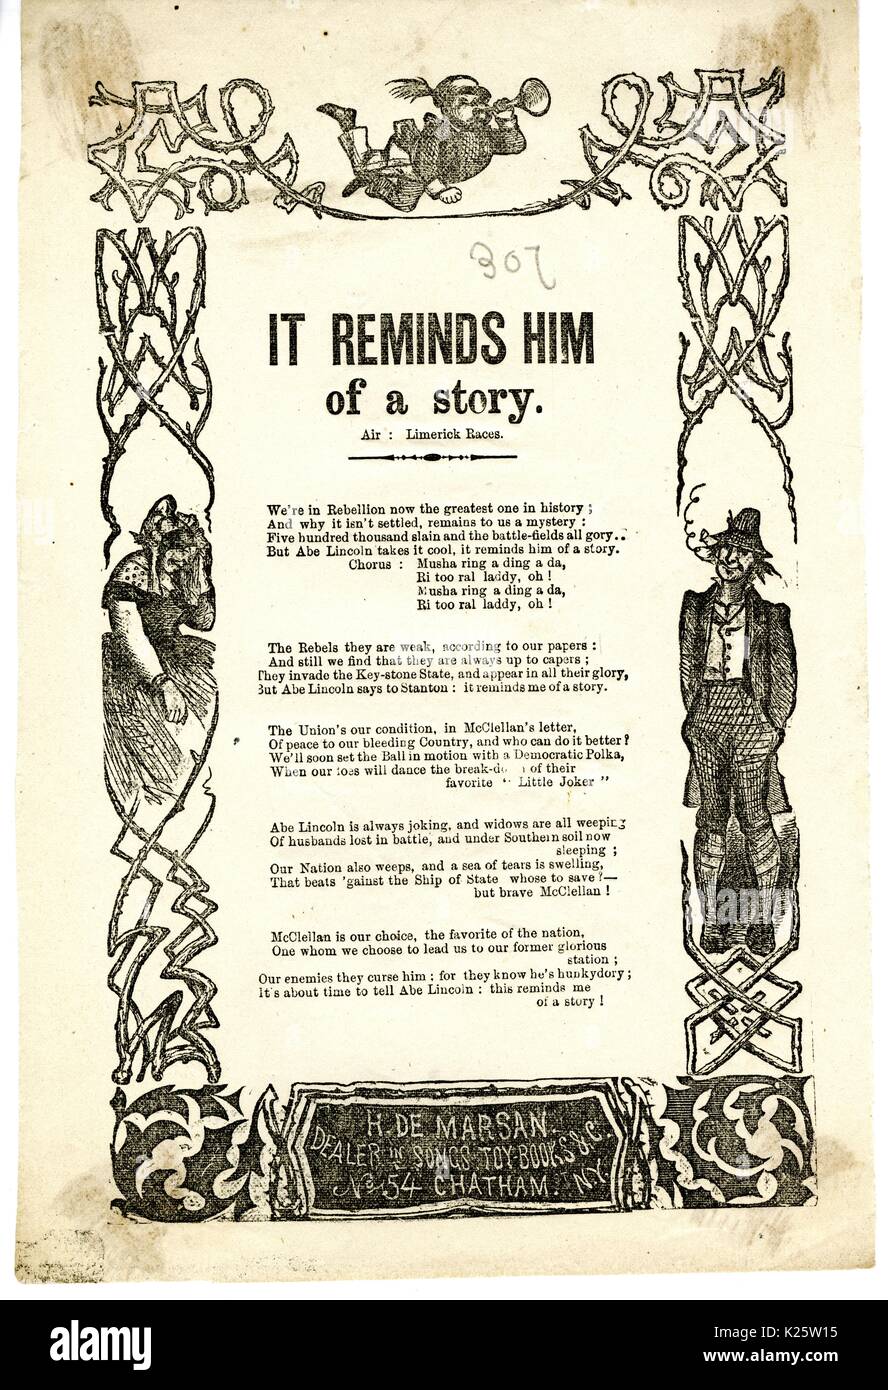 Broadside from the American Civil War, entitled 'It Reminds Him of a Story, ' advocating for General George McClellan's presidency and a united nation under his leadership, New York, New York, 1864. Stock Photo